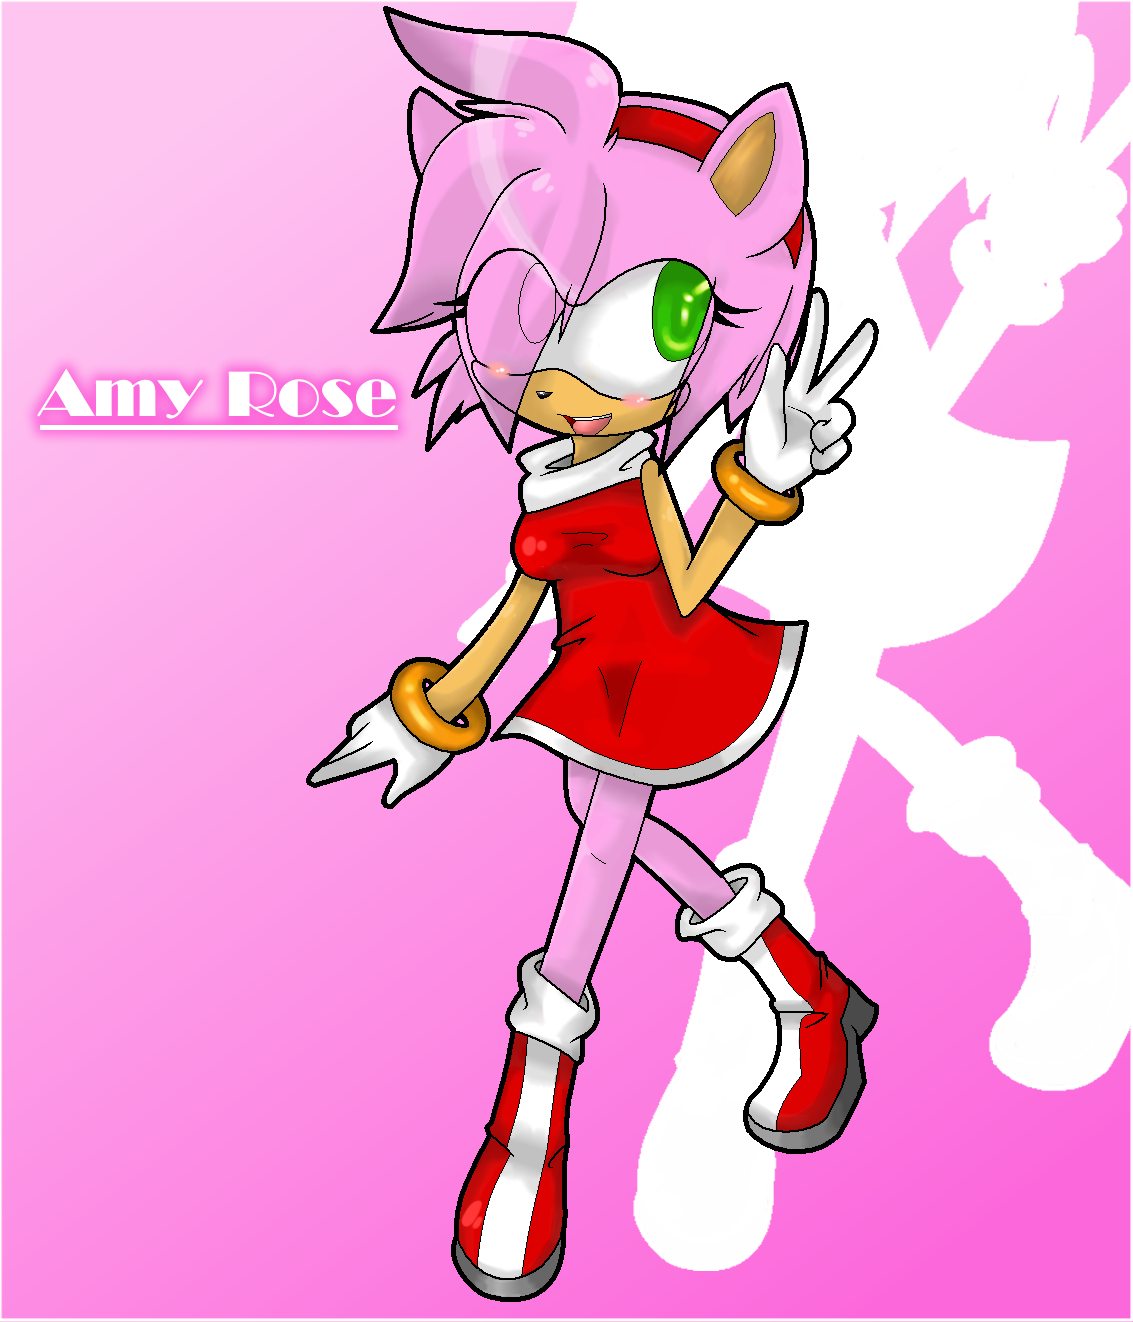 Amy Rose by Milesprower_Fox